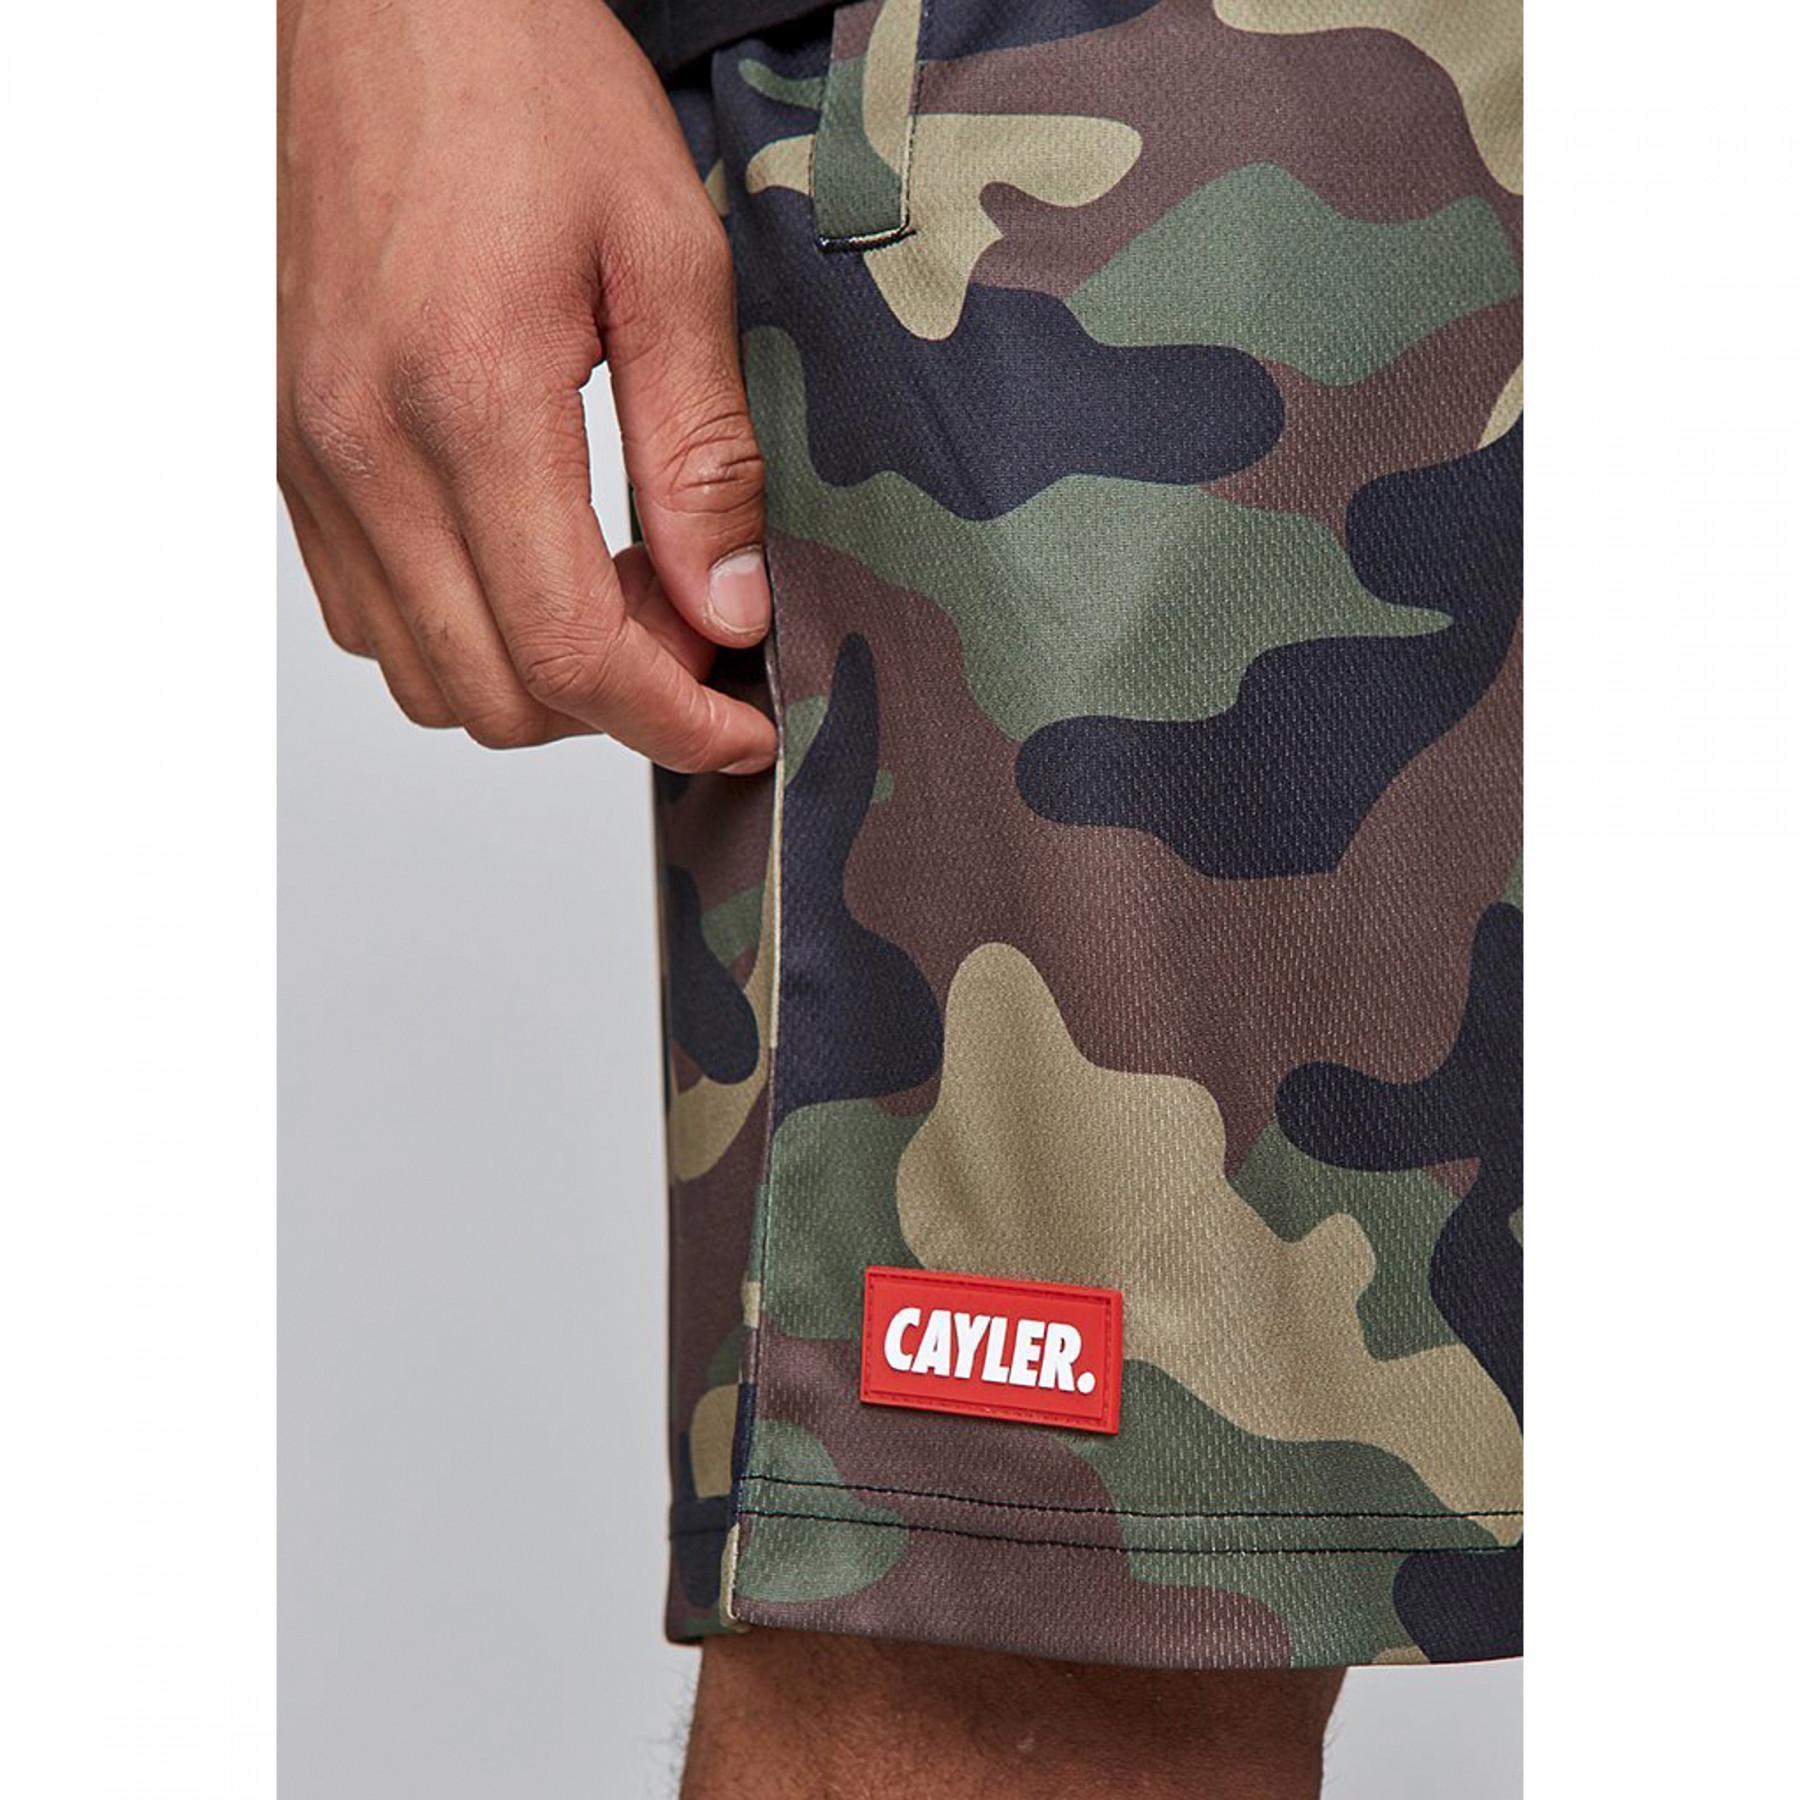 Cayler Shorts & Sons